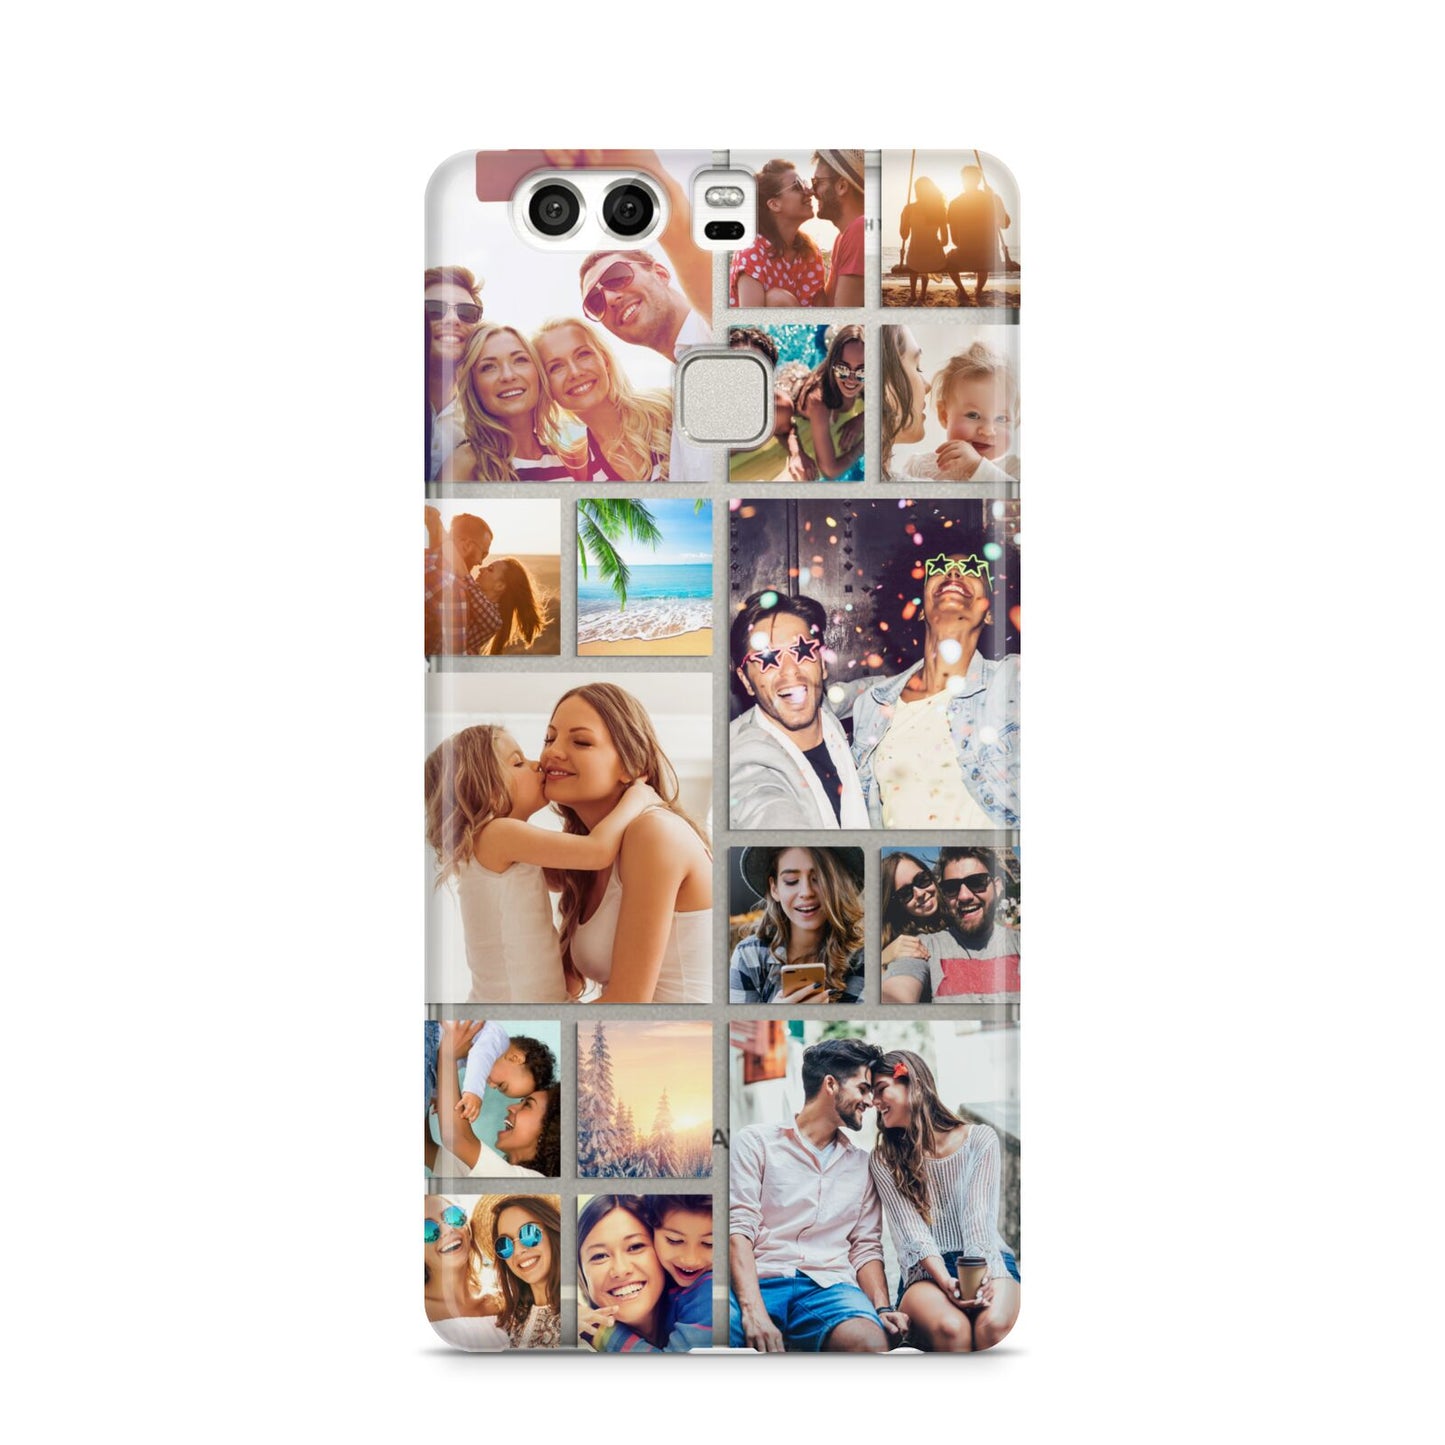 Abstract Multi Tile Photo Montage Upload Huawei P9 Case